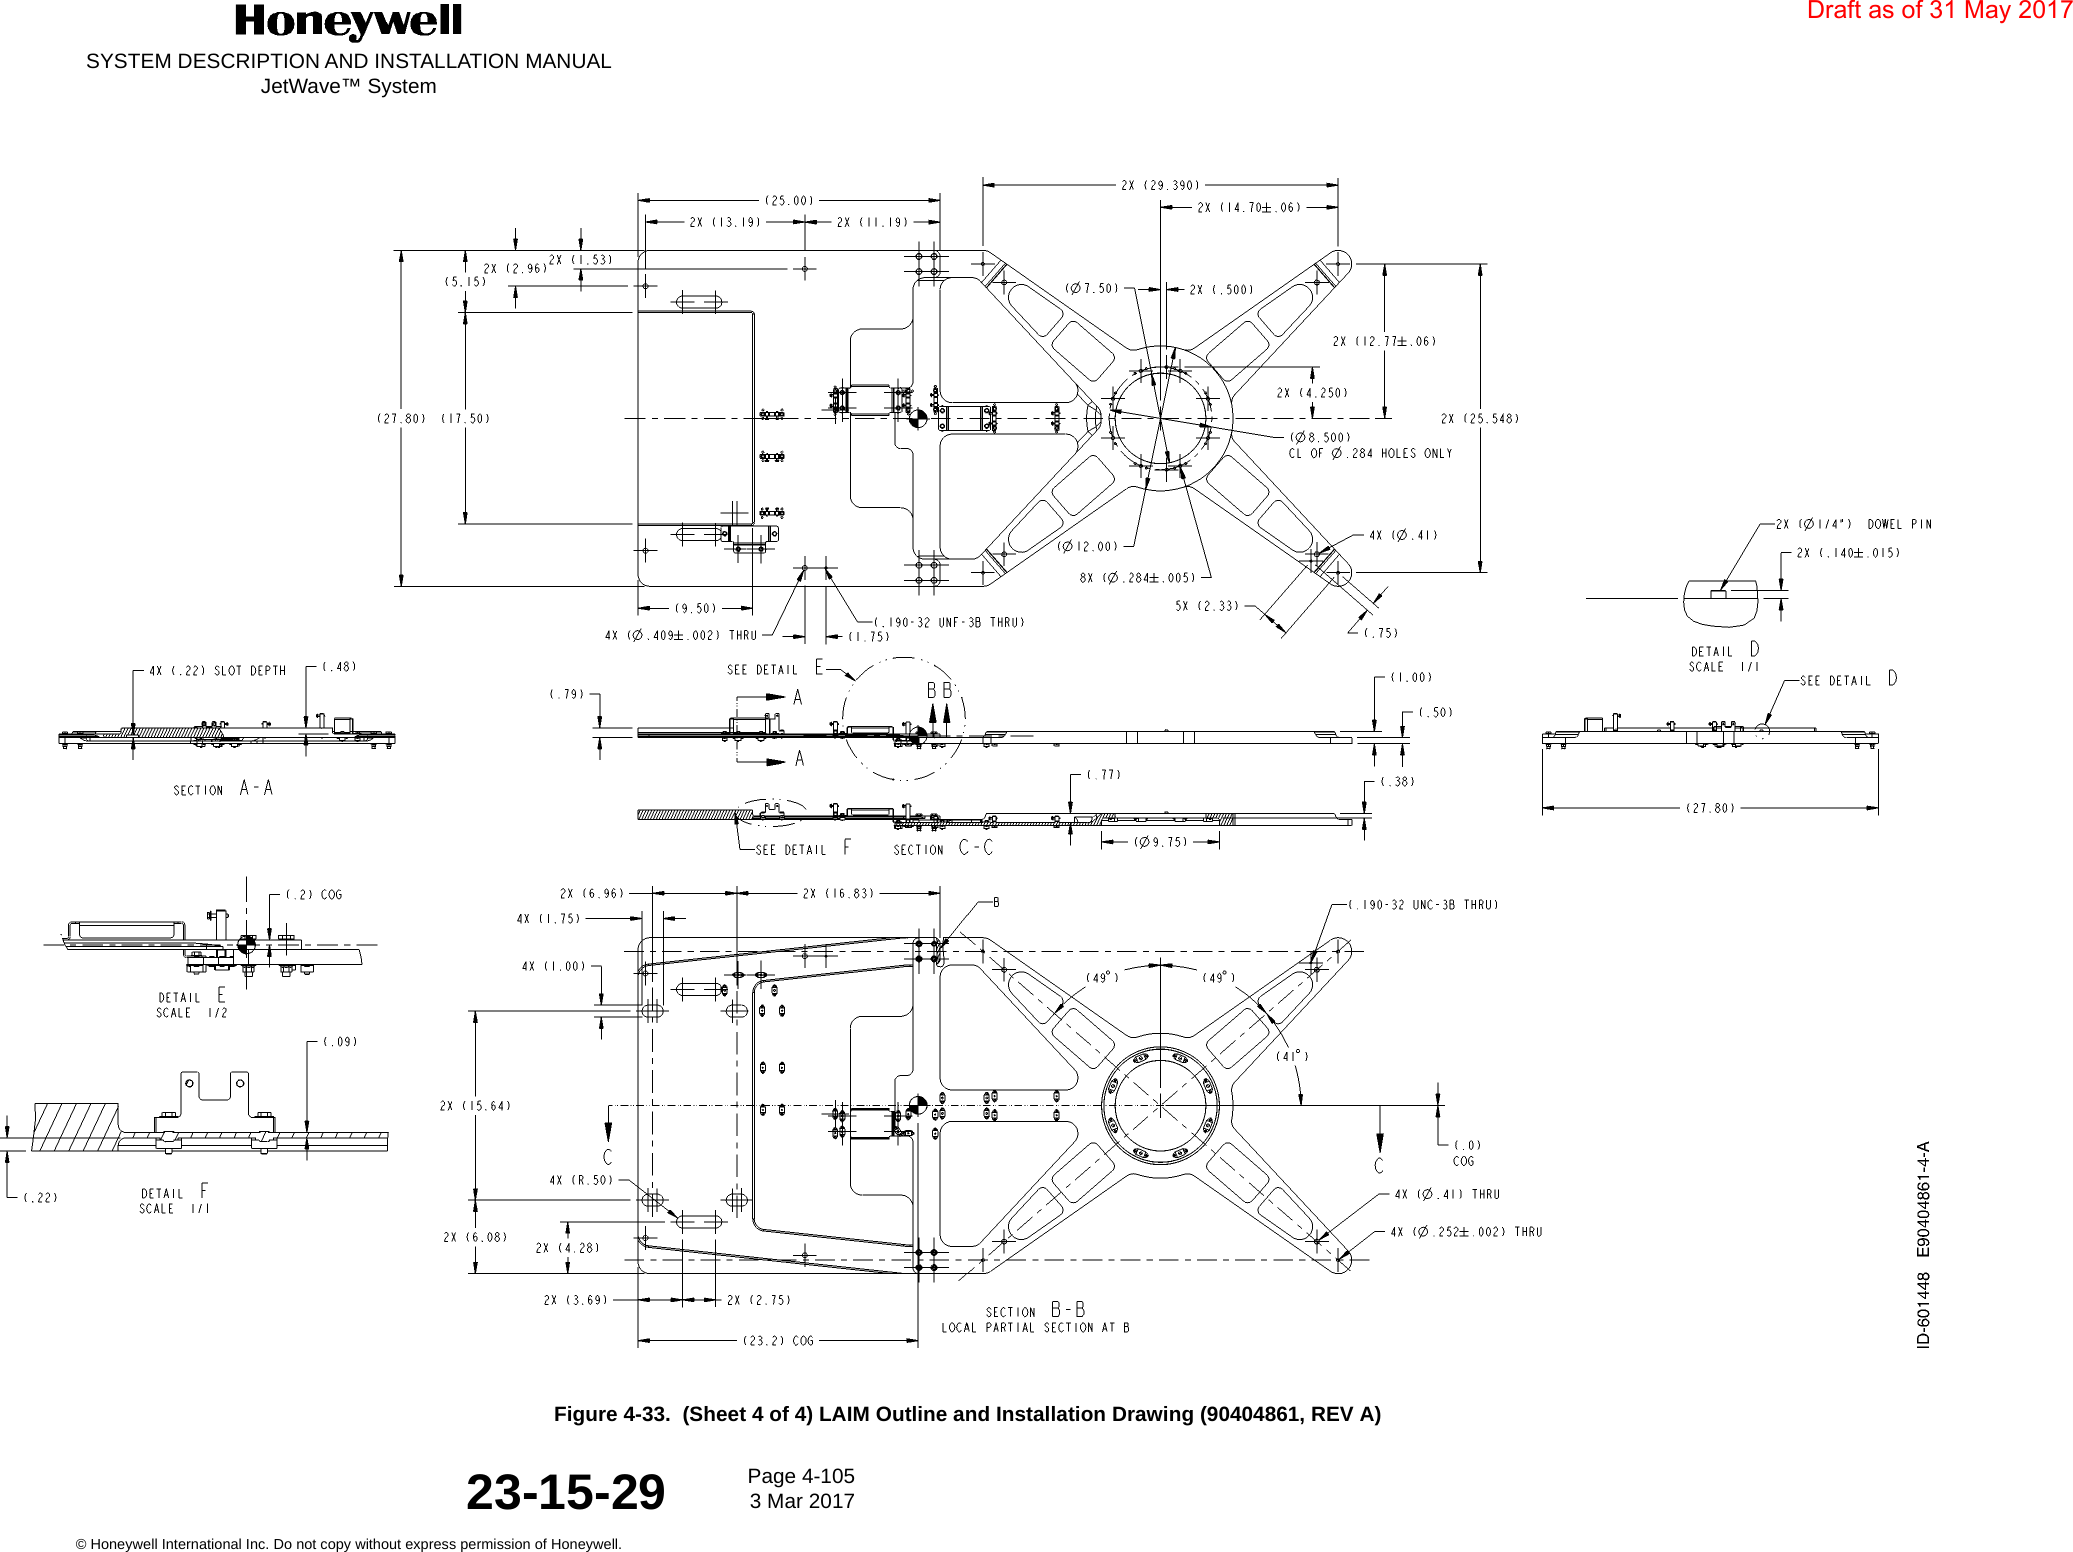 SYSTEM DESCRIPTION AND INSTALLATION MANUALJetWave™ SystemPage 4-105 3 Mar 2017© Honeywell International Inc. Do not copy without express permission of Honeywell.23-15-29Figure 4-33.  (Sheet 4 of 4) LAIM Outline and Installation Drawing (90404861, REV A)Draft as of 31 May 2017